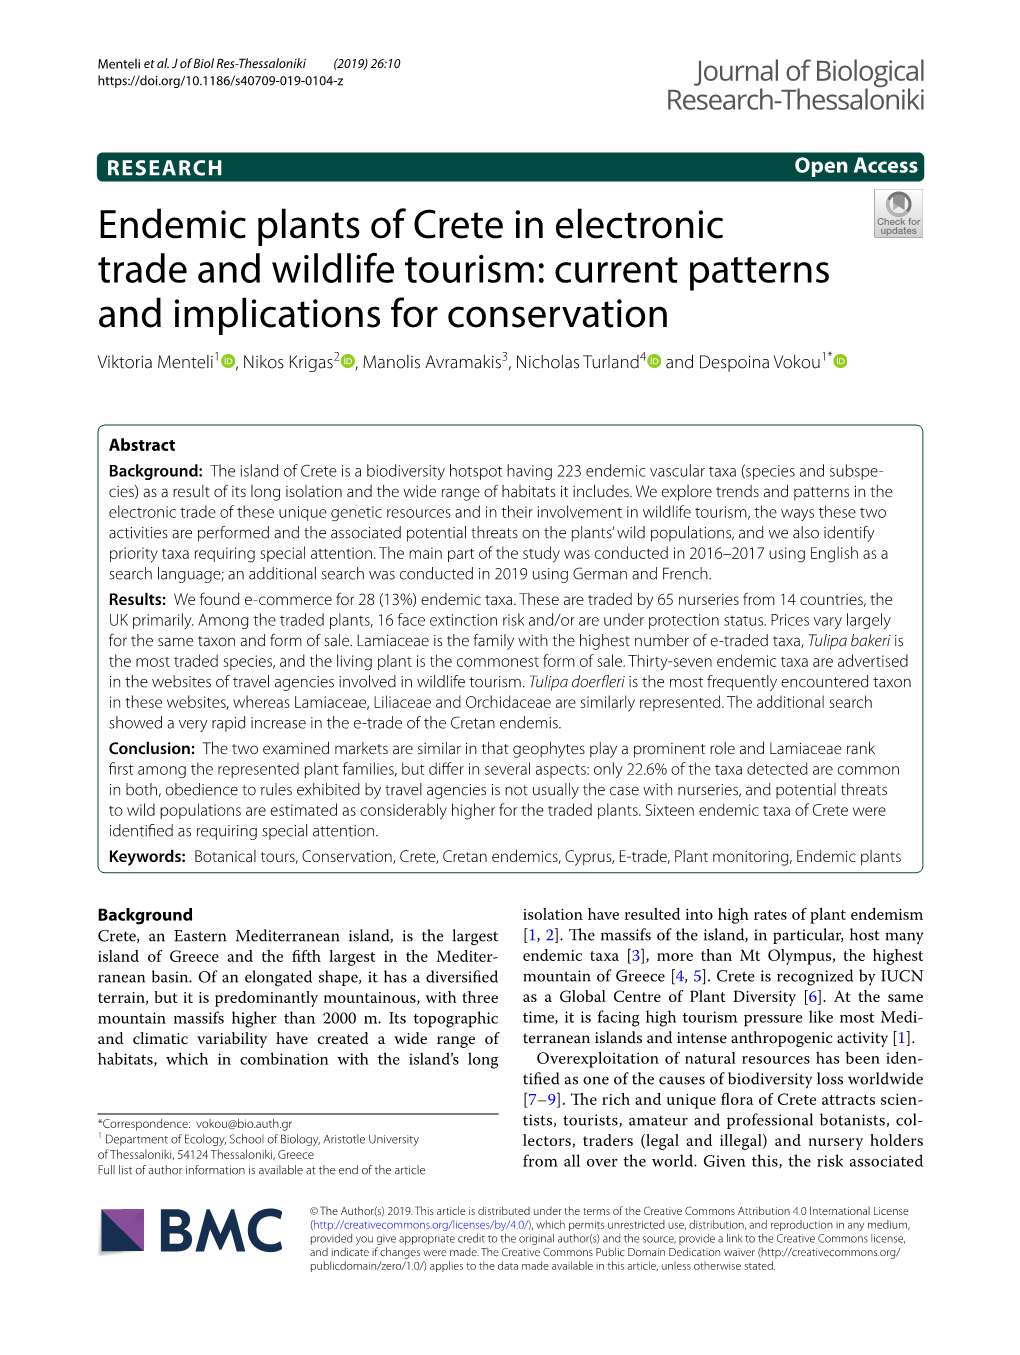 Endemic Plants of Crete in Electronic Trade and Wildlife Tourism: Current